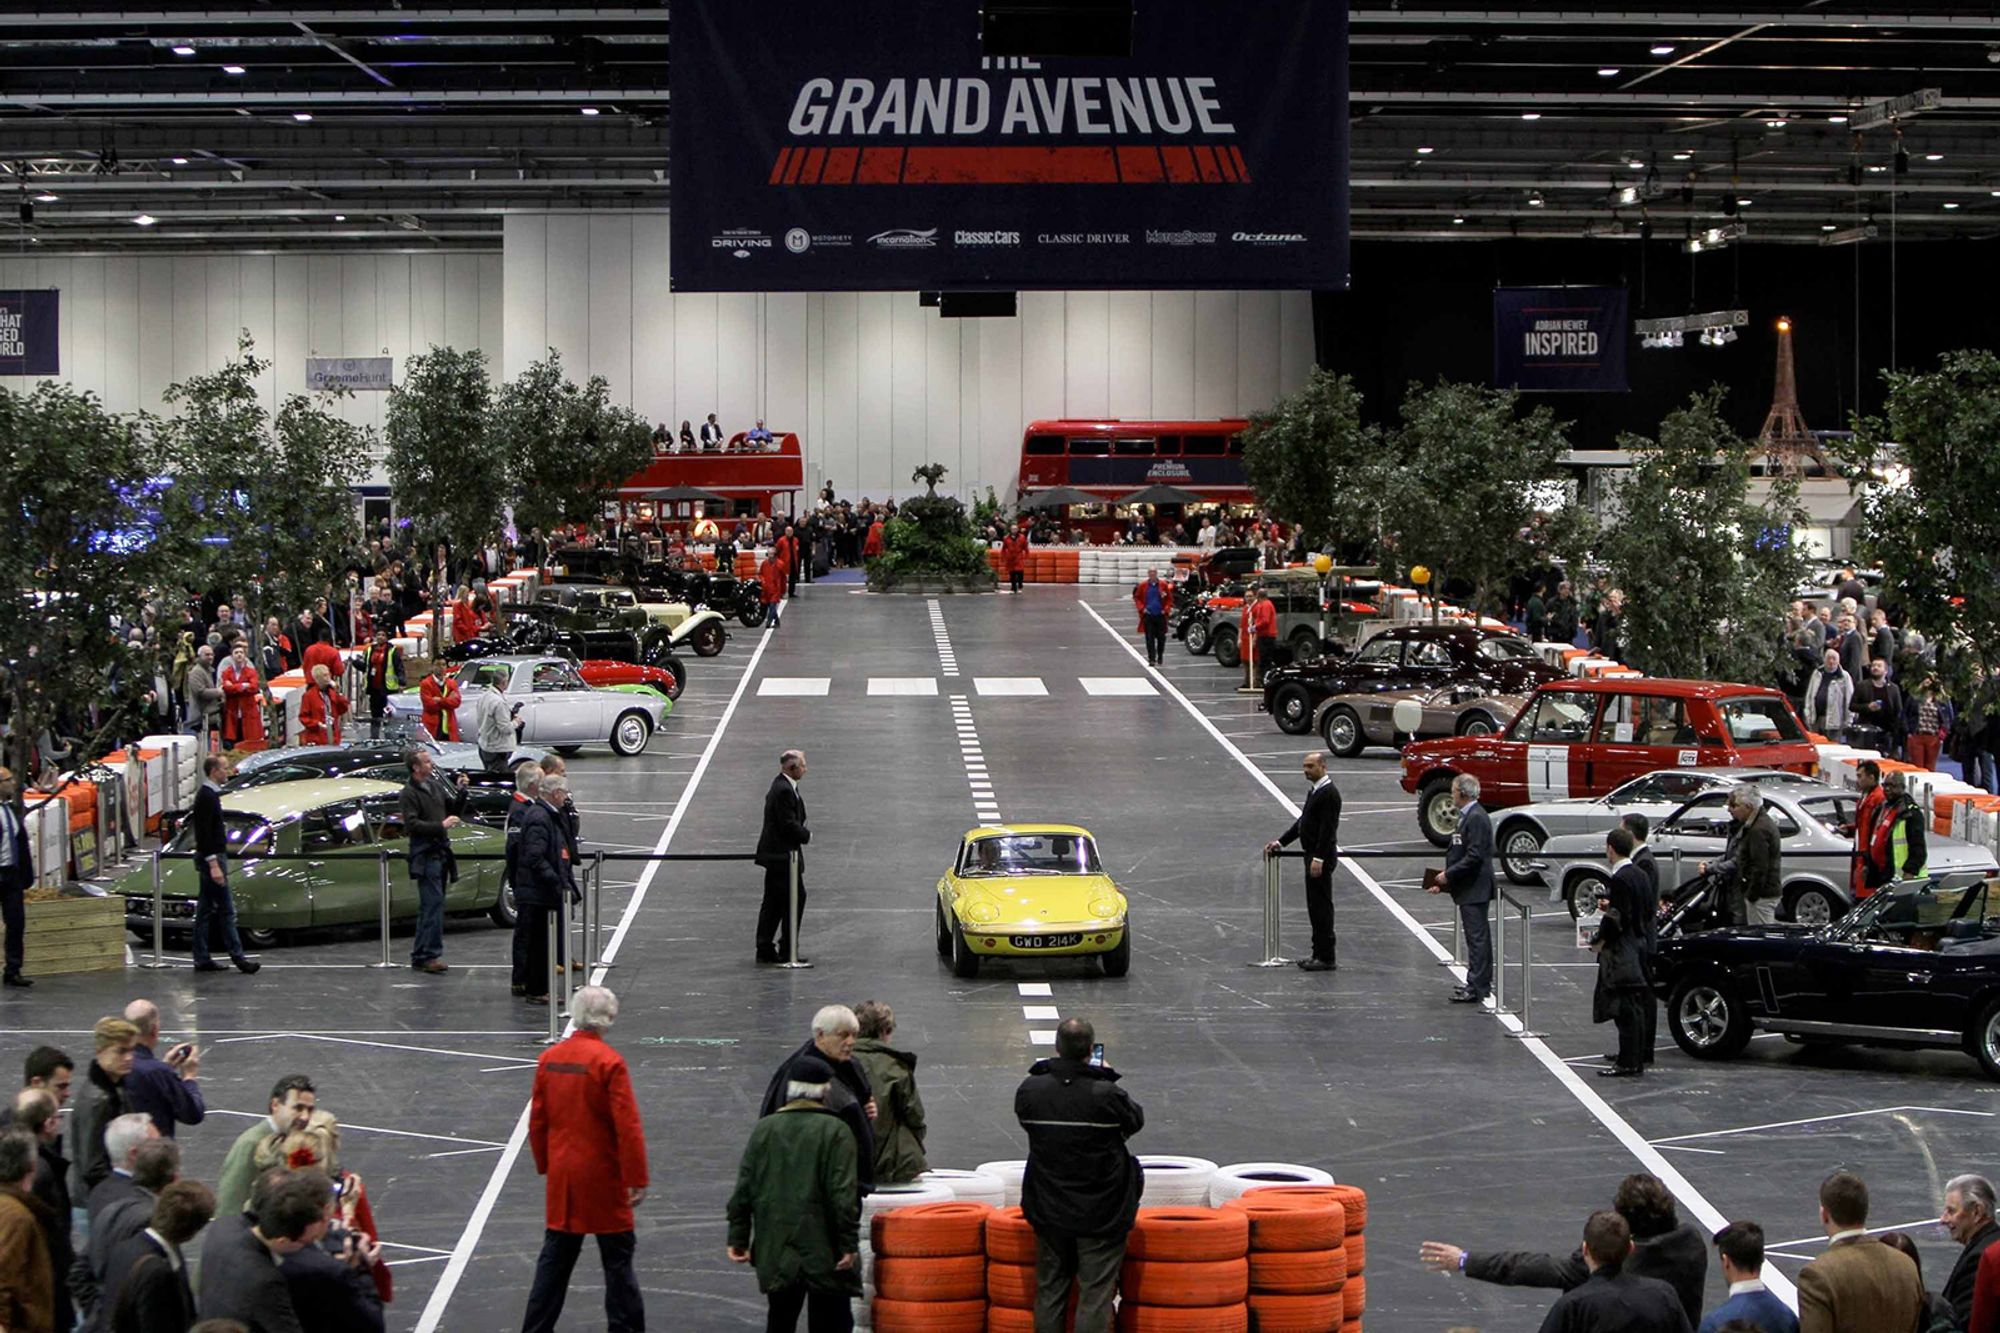 The London Classic Car Show - 2 days to go!